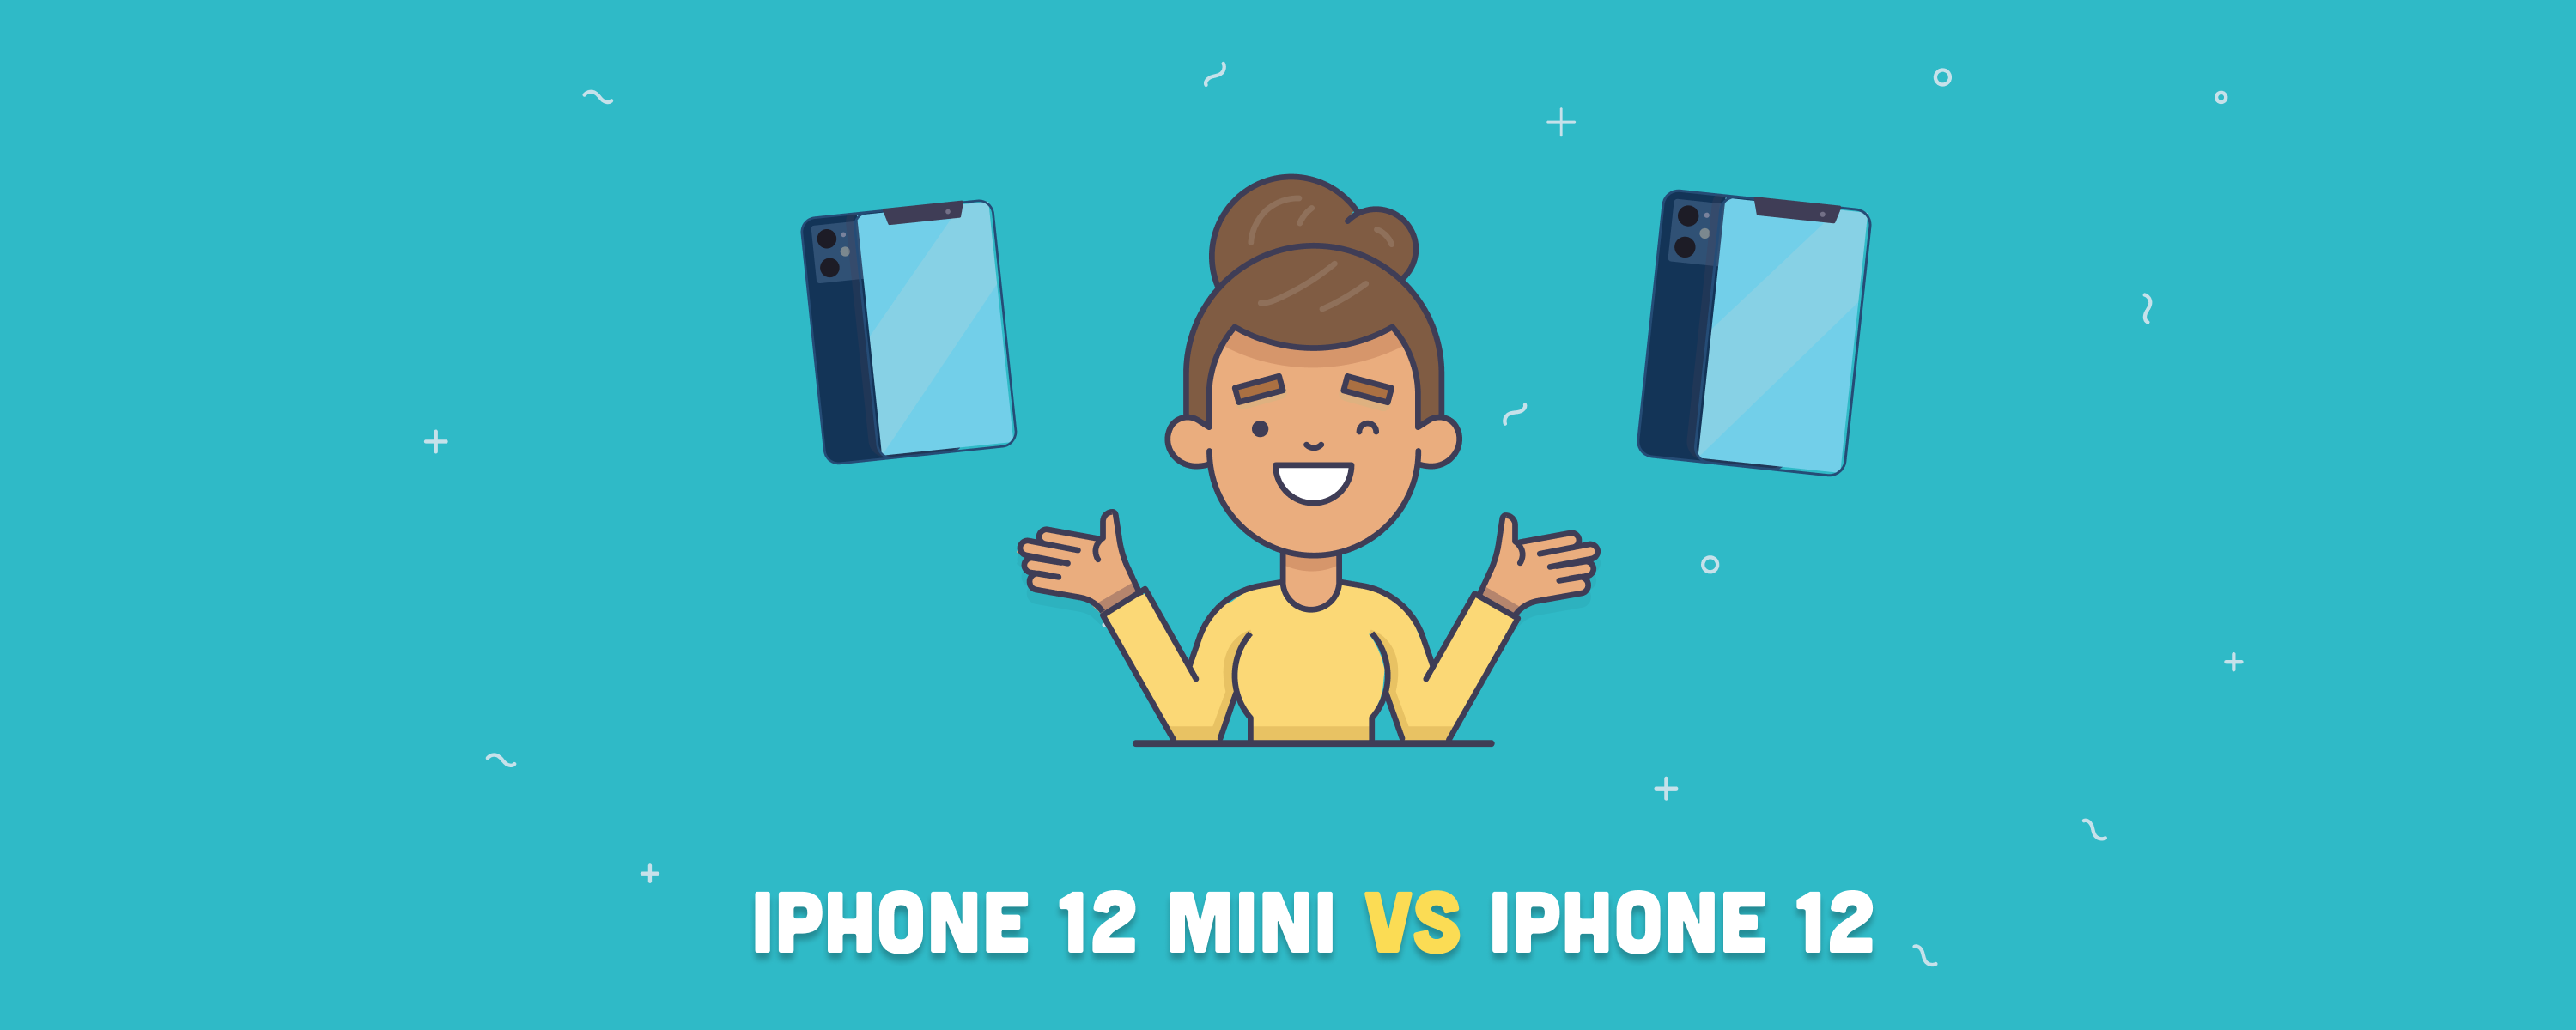 iPhone 12 mini vs. iPhone 12: Which One Should You Choose?